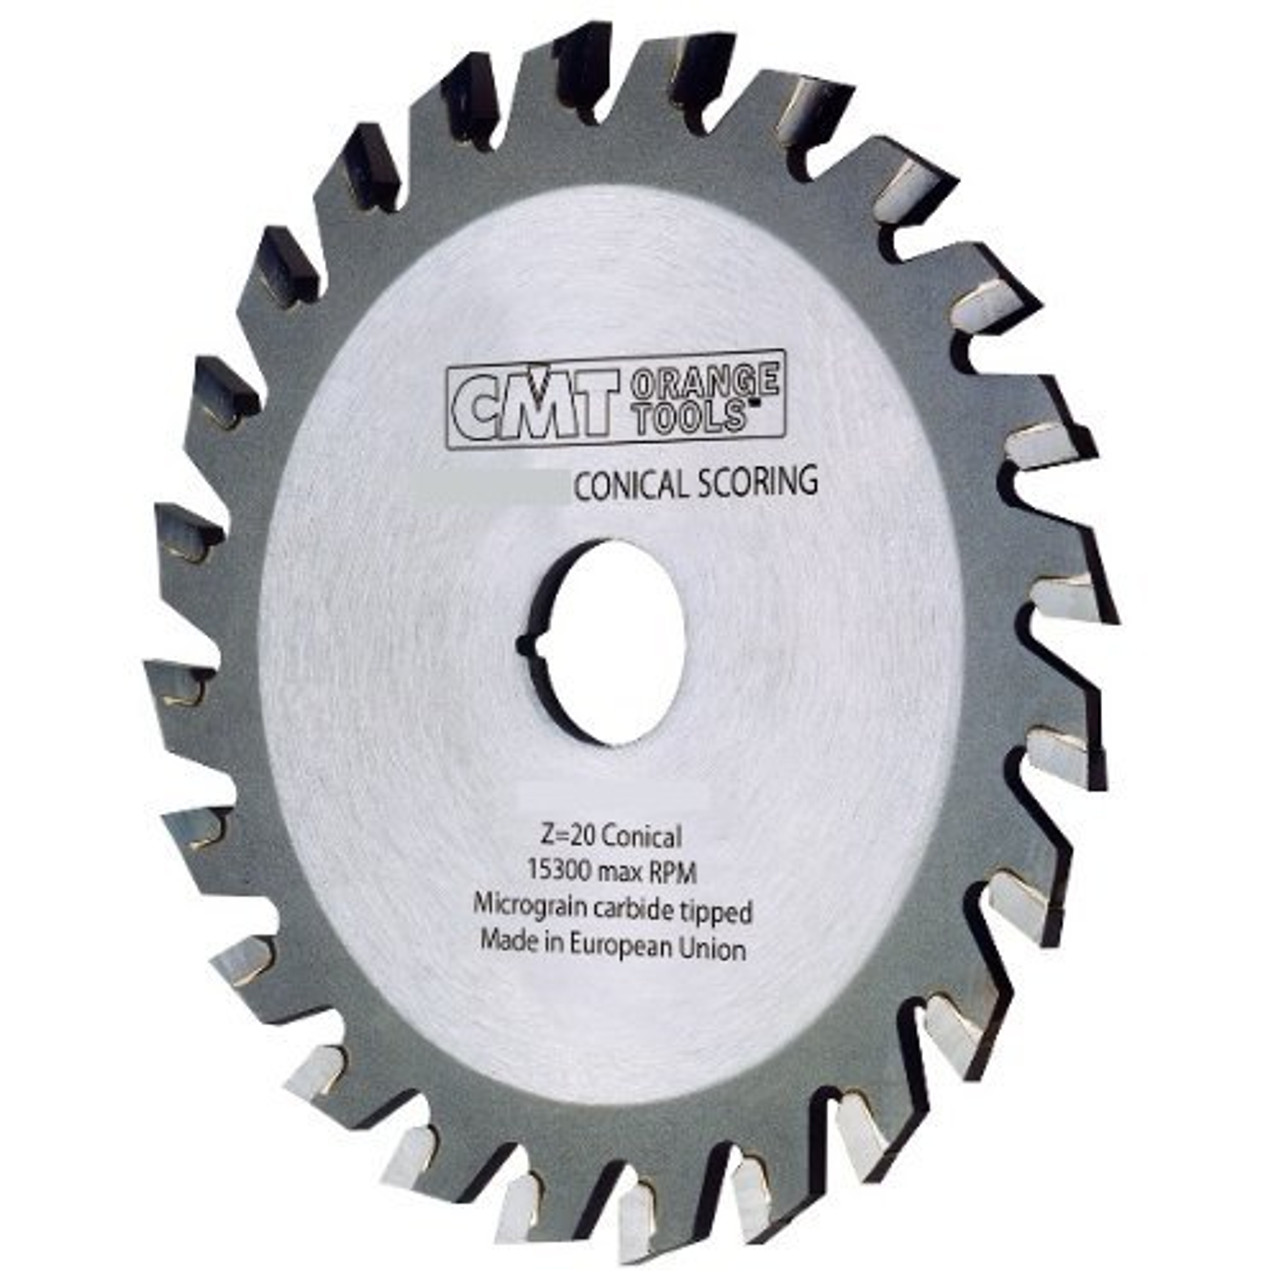 CMT 288.160.36Q Industrial Conical Scoring Blade, 160mm (6-19/64-Inch) X 36 Conical Teeth with 45mm Bore